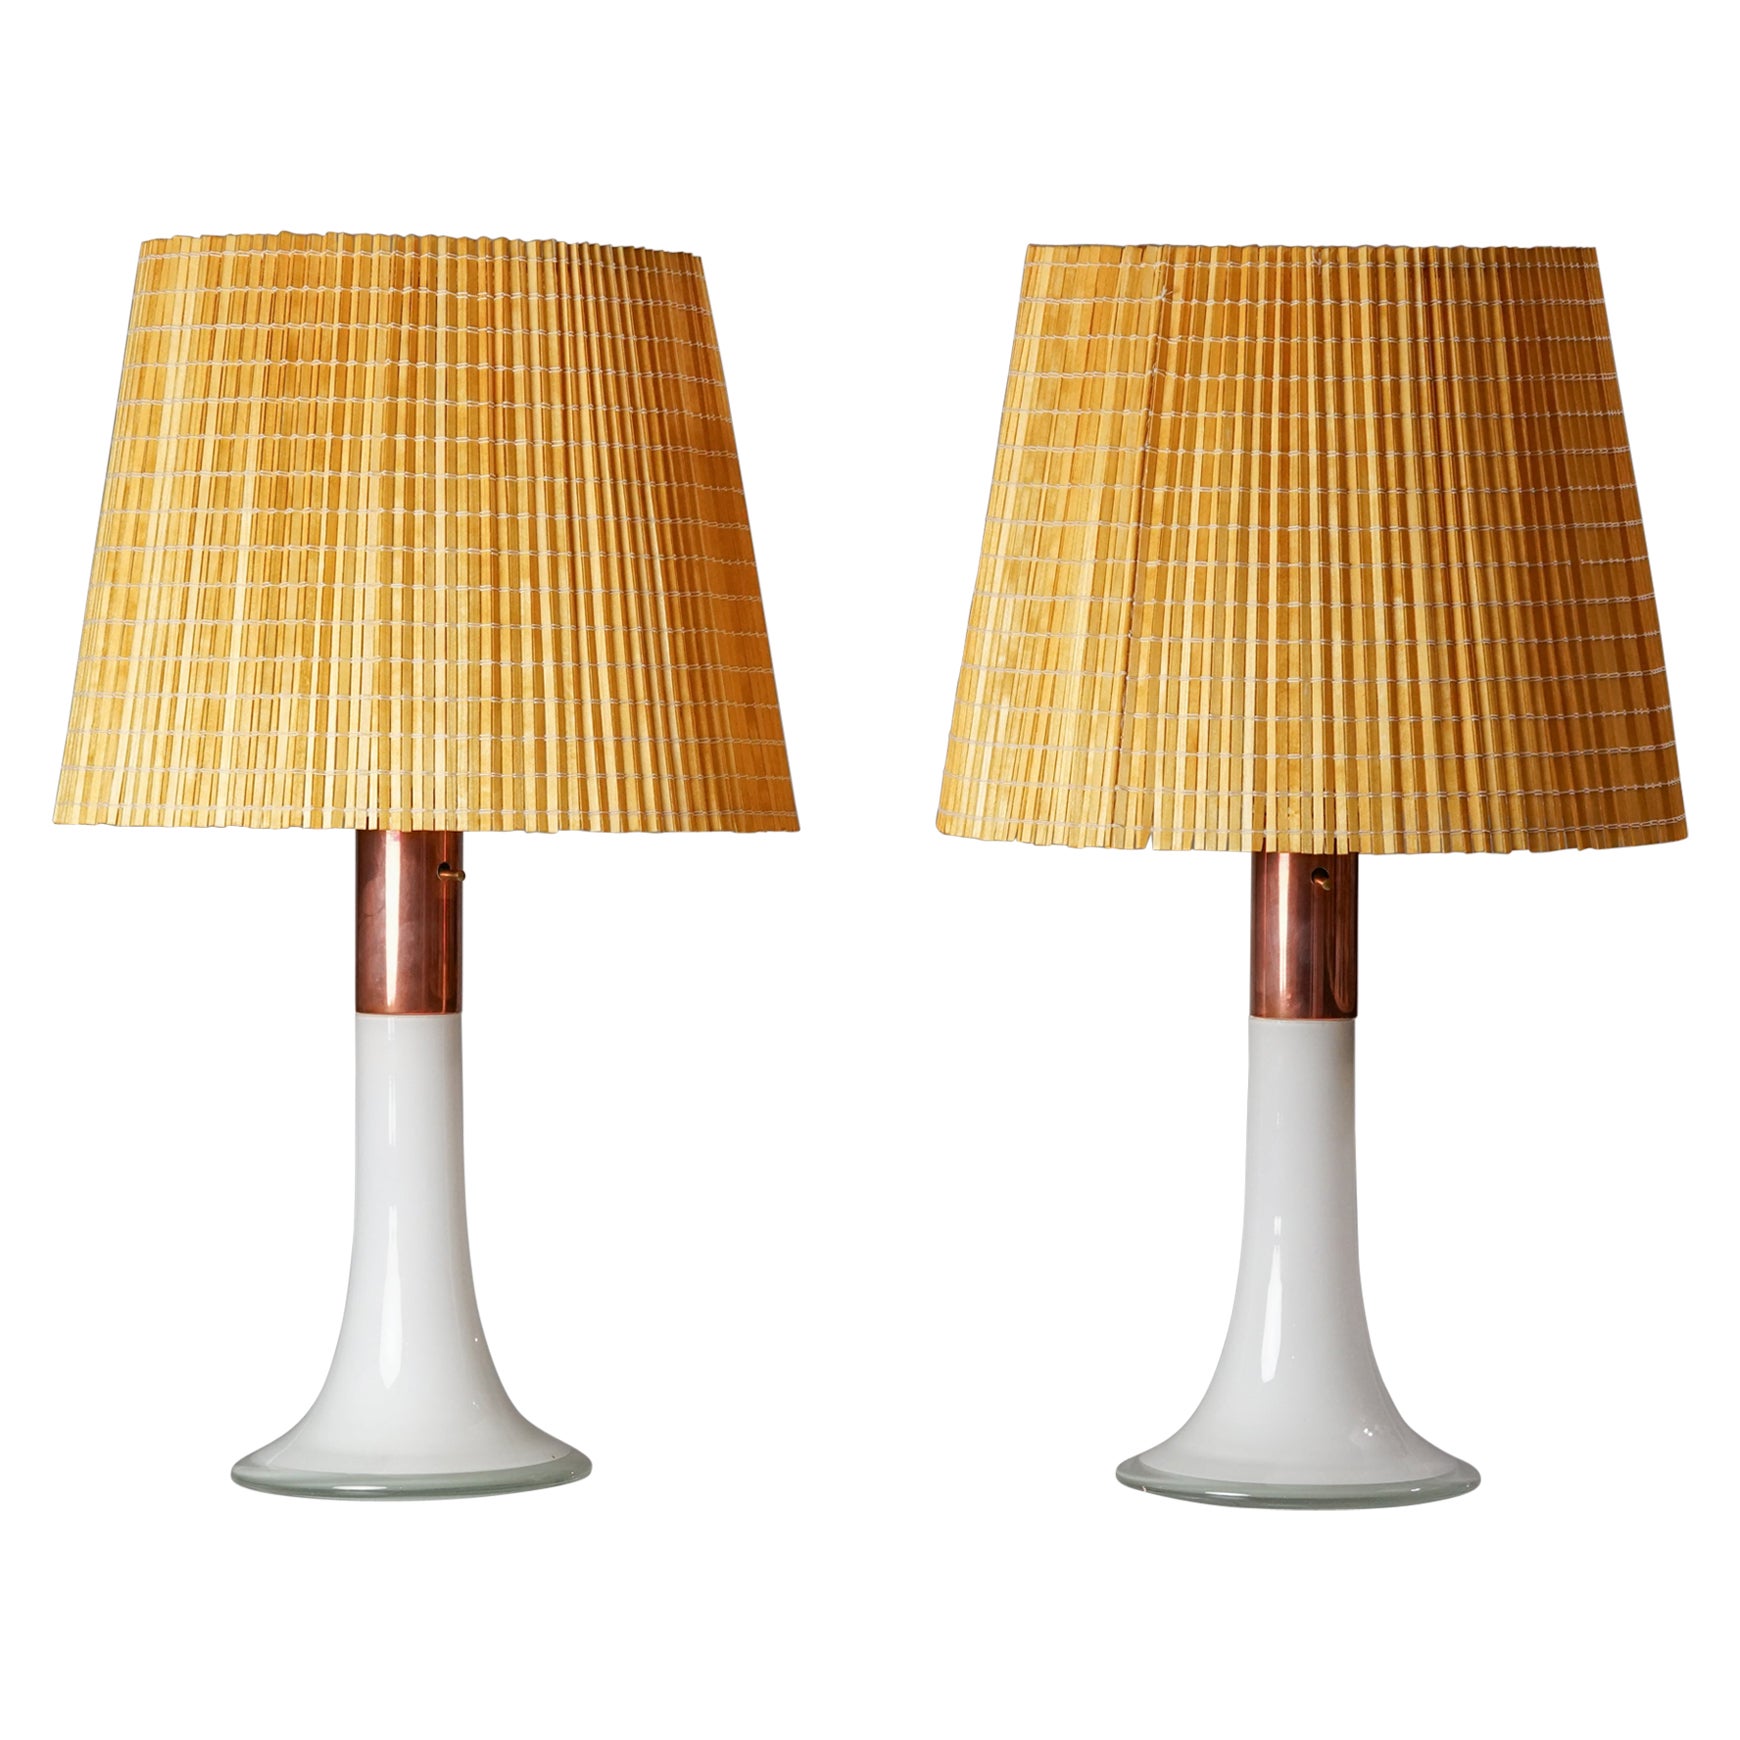 Pair of Lisa Johansson-Pape Glass Lamps With Wooden Slat Shades, Orno Oy, 1960s For Sale